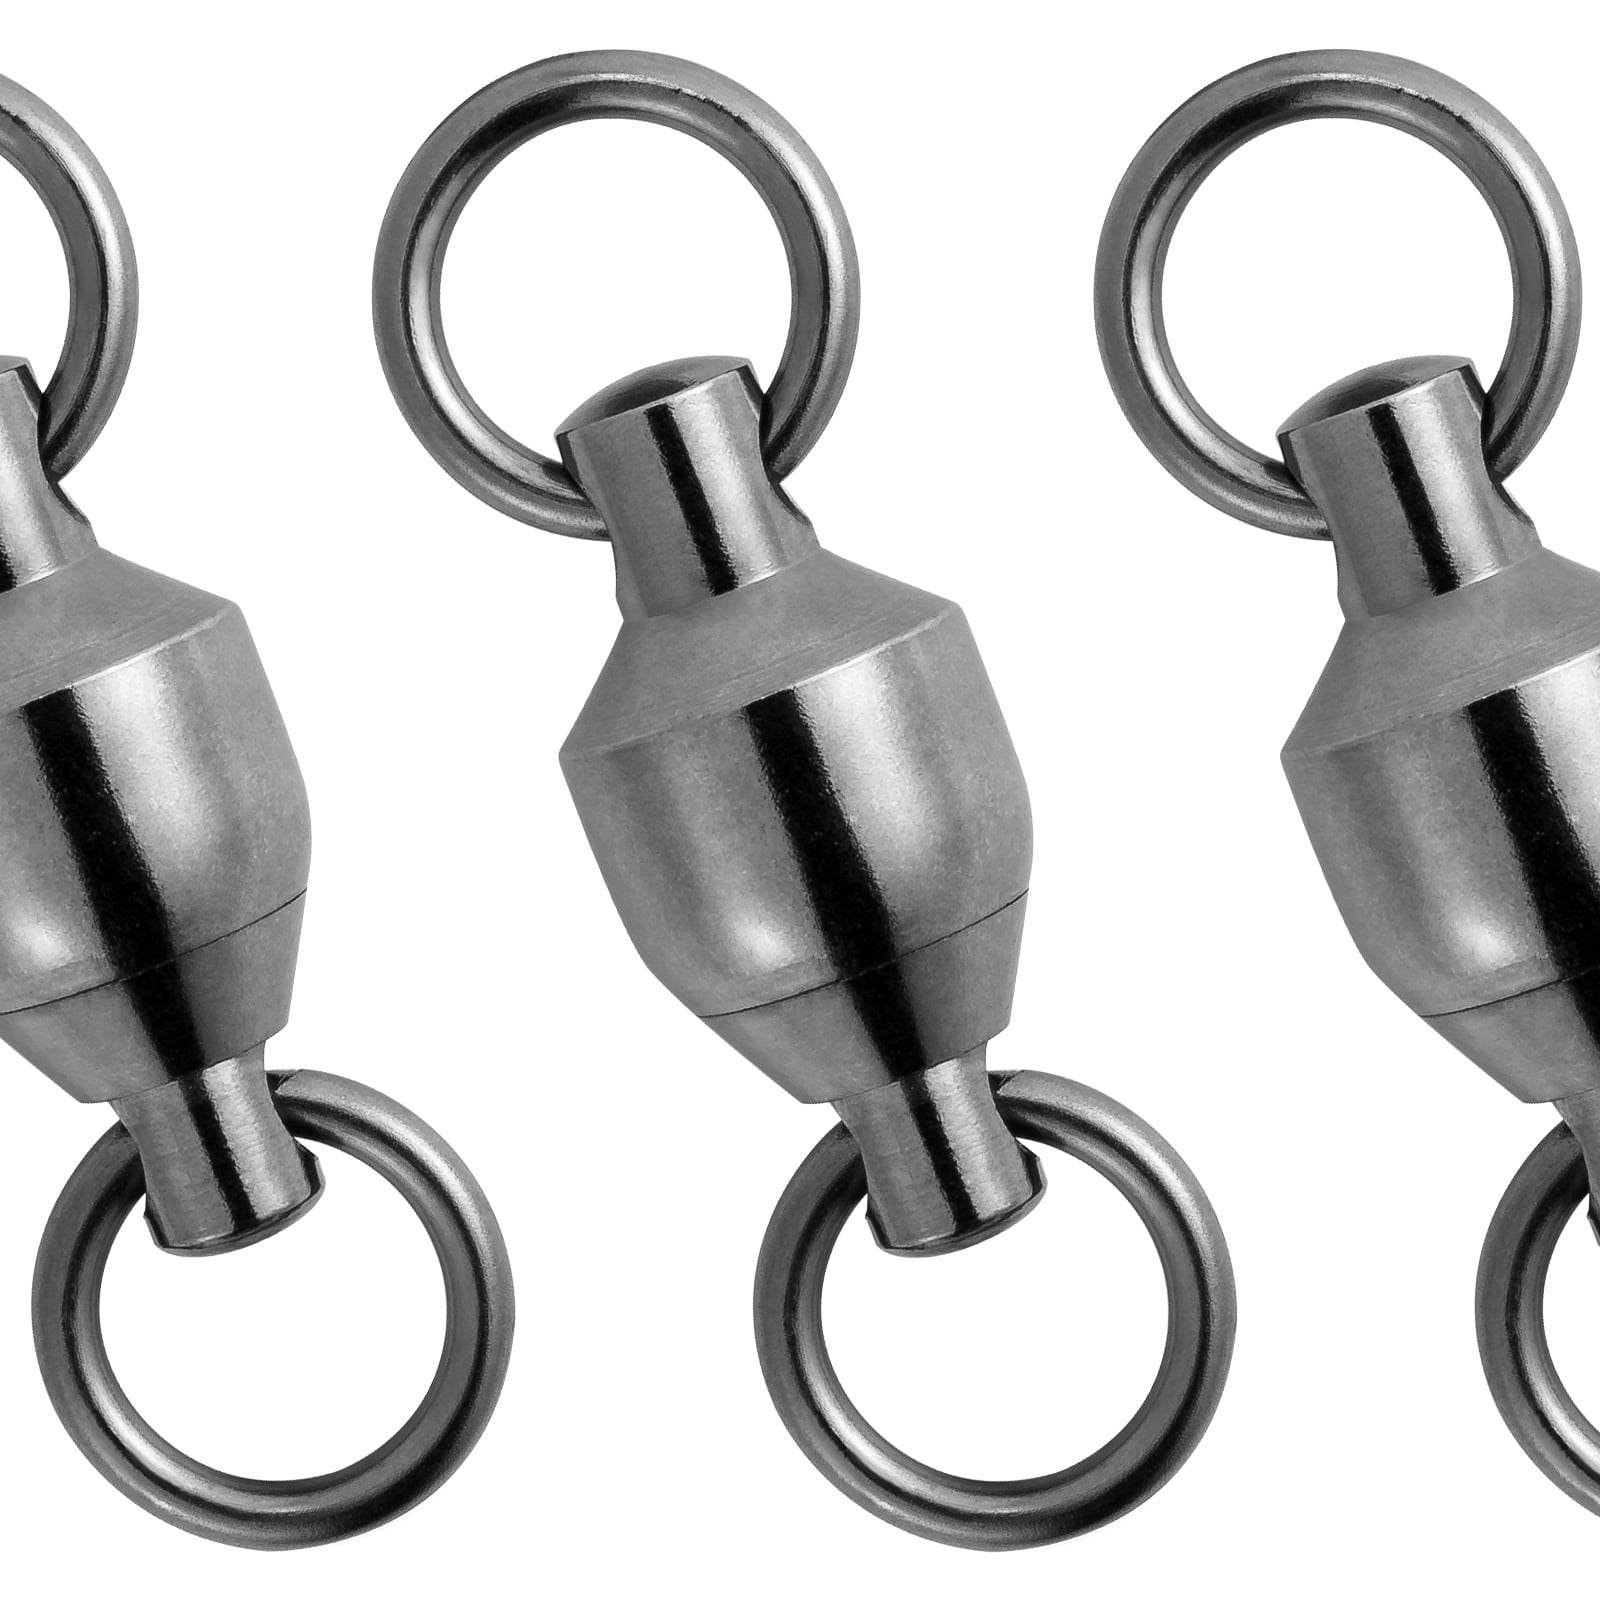 Black High Strength Fishing Ball Bearing Swivels Connectors with Welded Rings Fish Swivel Test 35lb-390lb